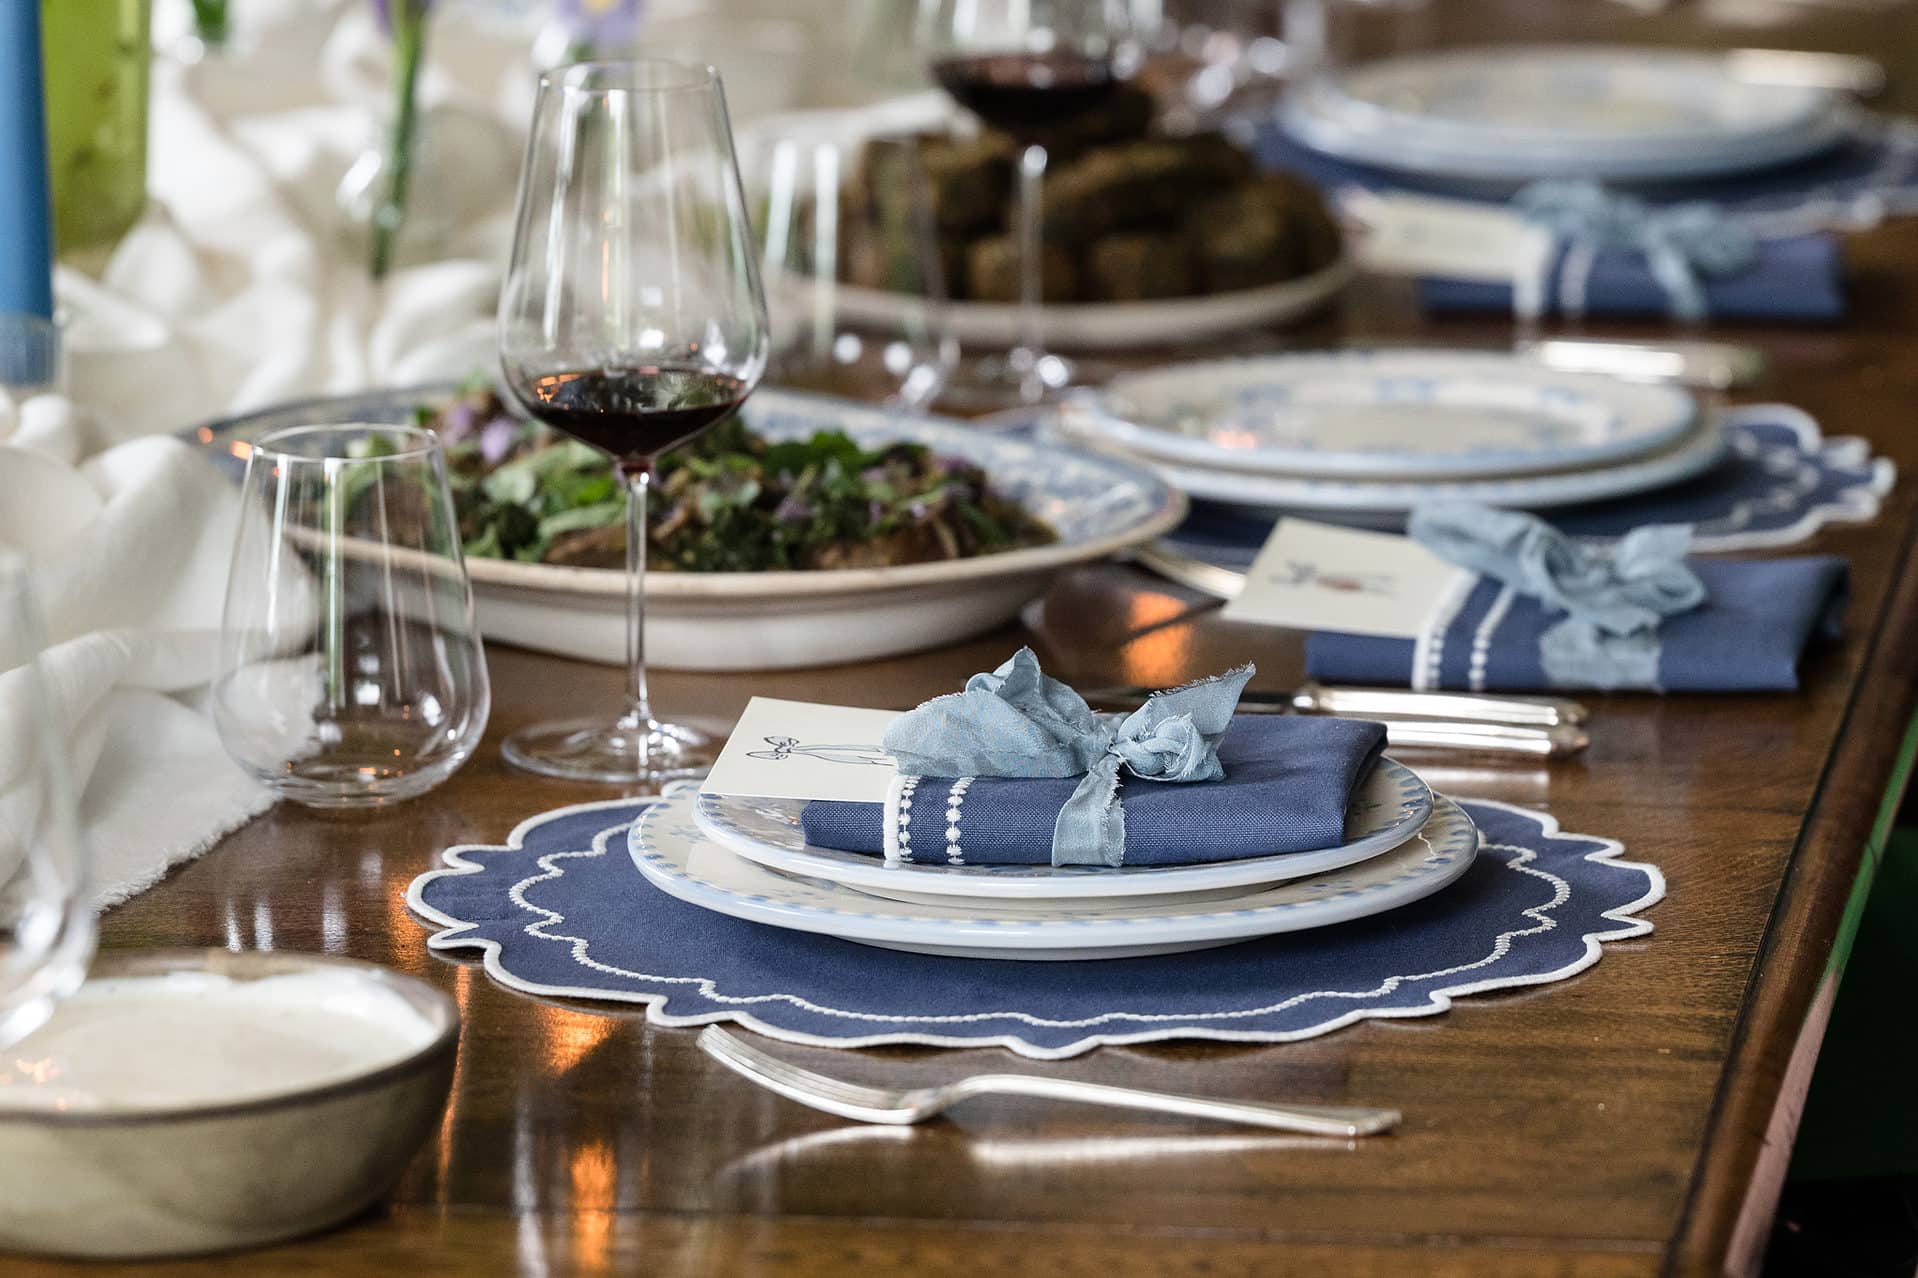 Dinner placesettings in shades of blue